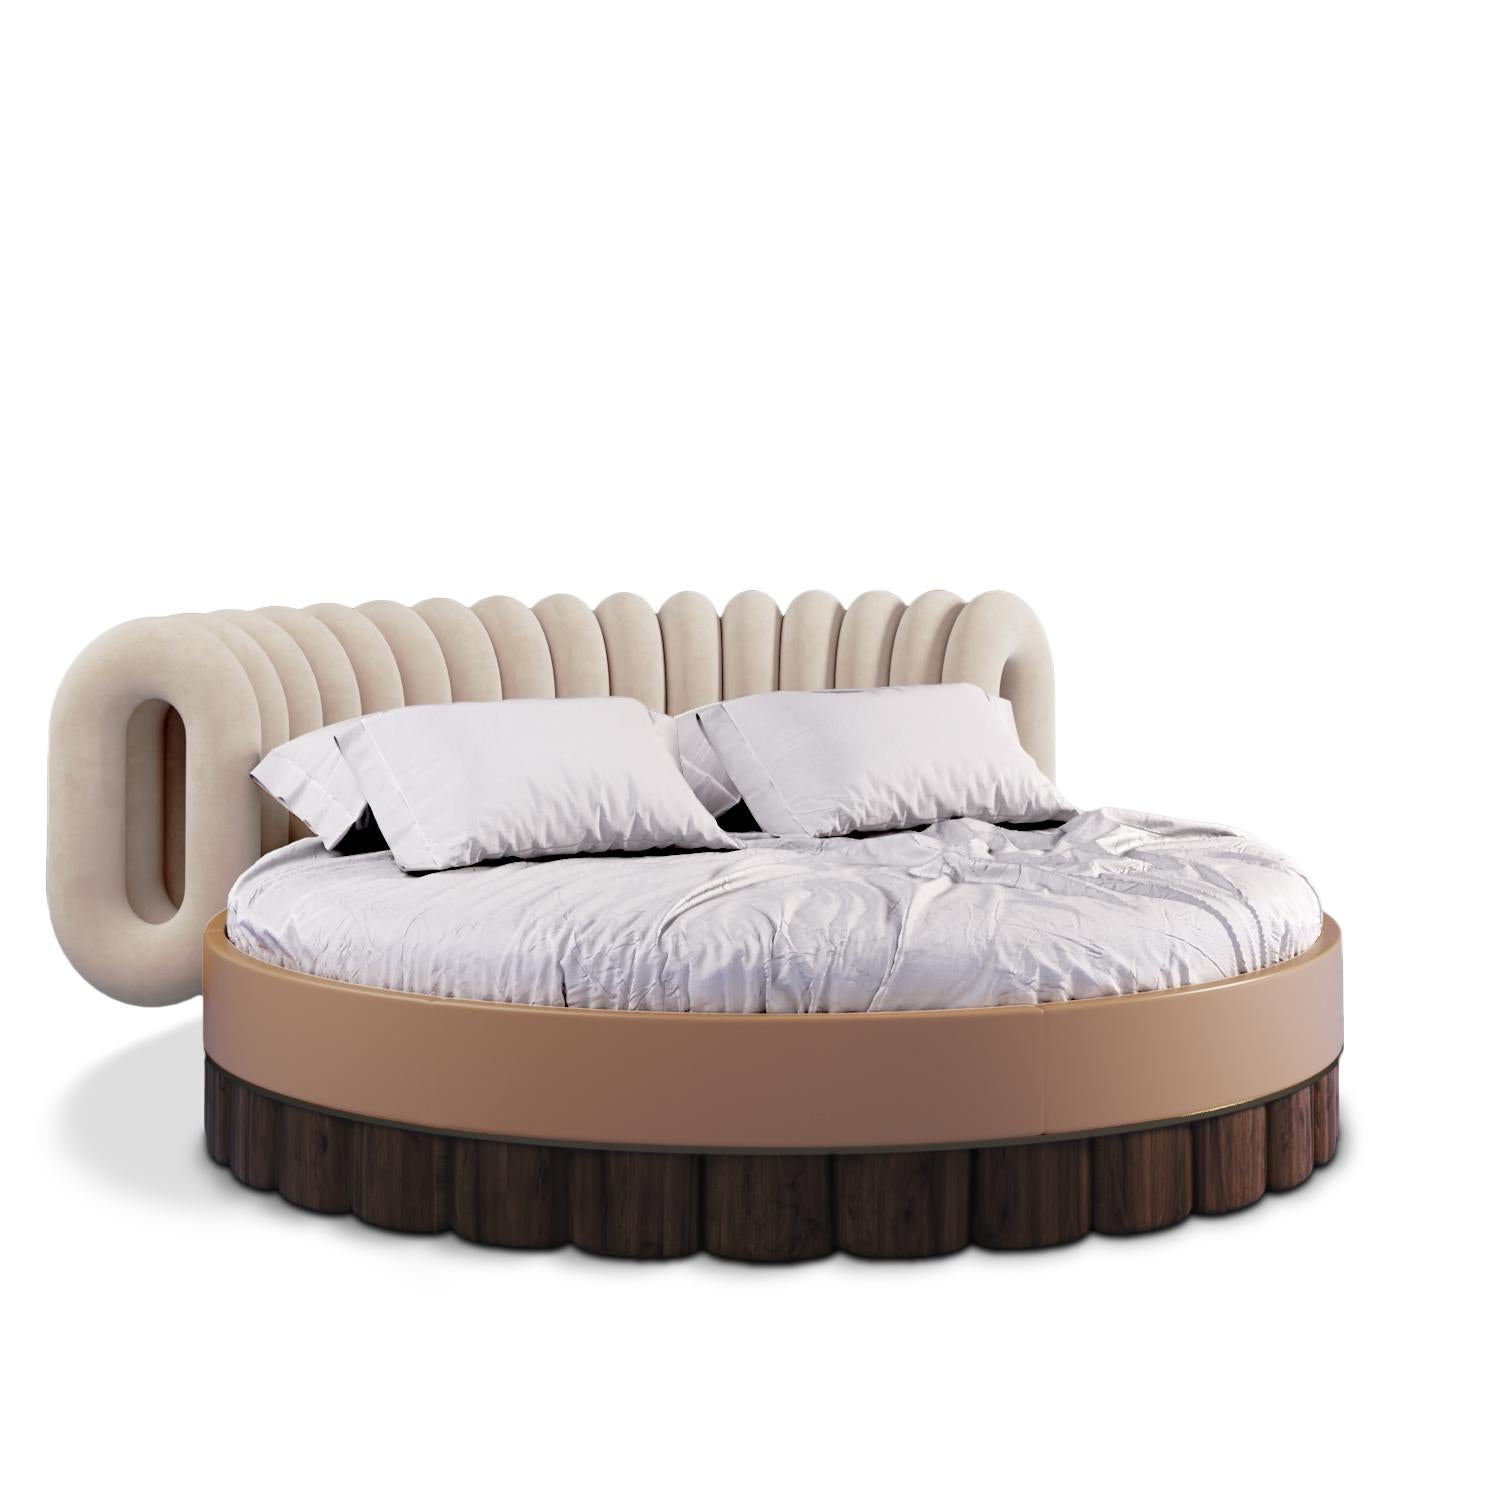 circle bed for sale